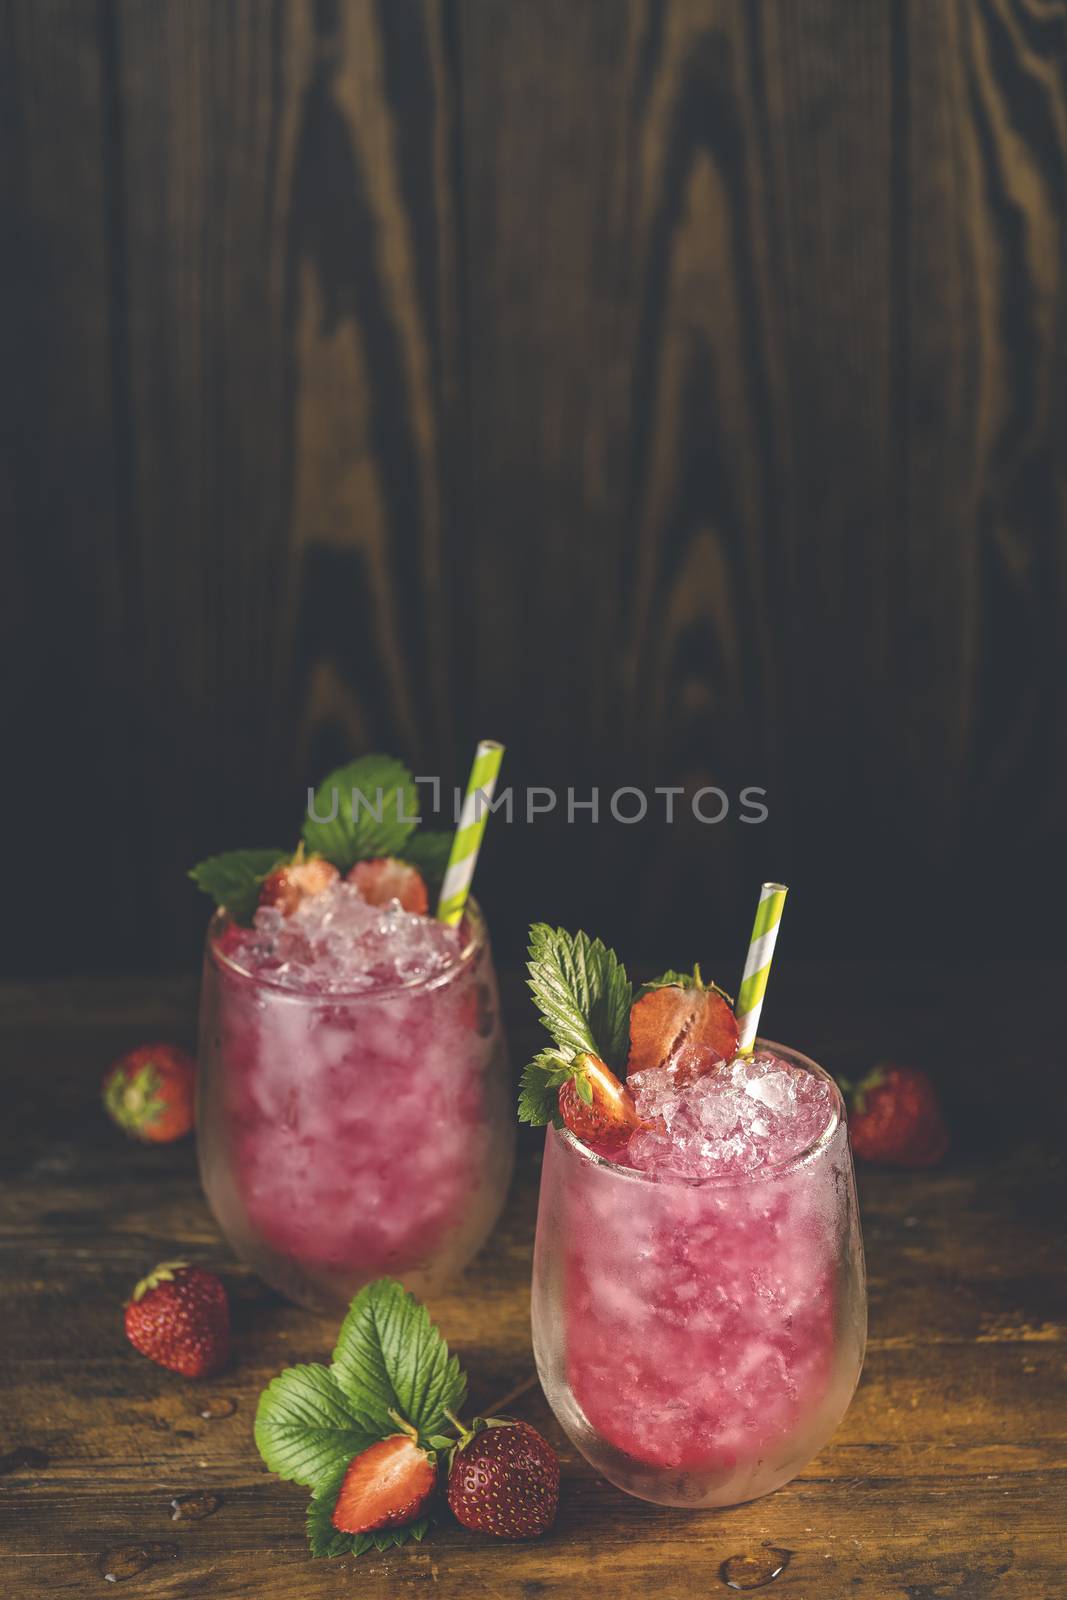 Strawberry drink with ice. Two glass of strawberry ice drink with ripe berry on wooden turquoise table surface. Alcoholic nonalcoholic summer fresh drink beverage	